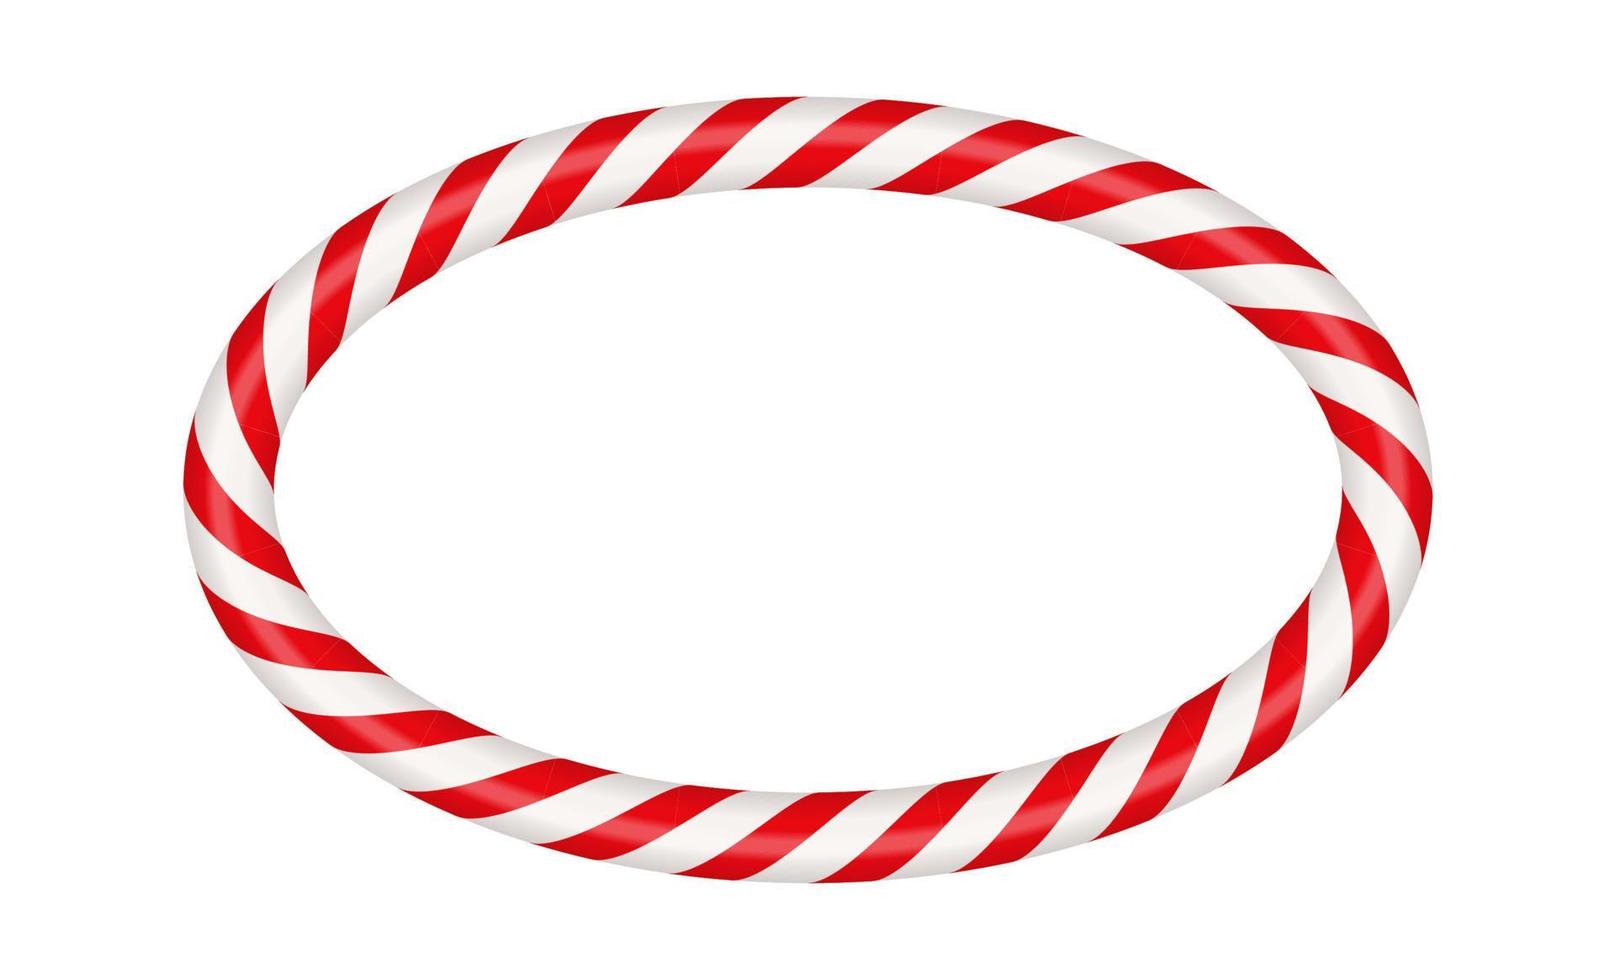 Christmas candy cane oval frame with red and white striped. Xmas border with striped candy lollipop pattern. Blank christmas and new year template. Vector illustration isolated on white background